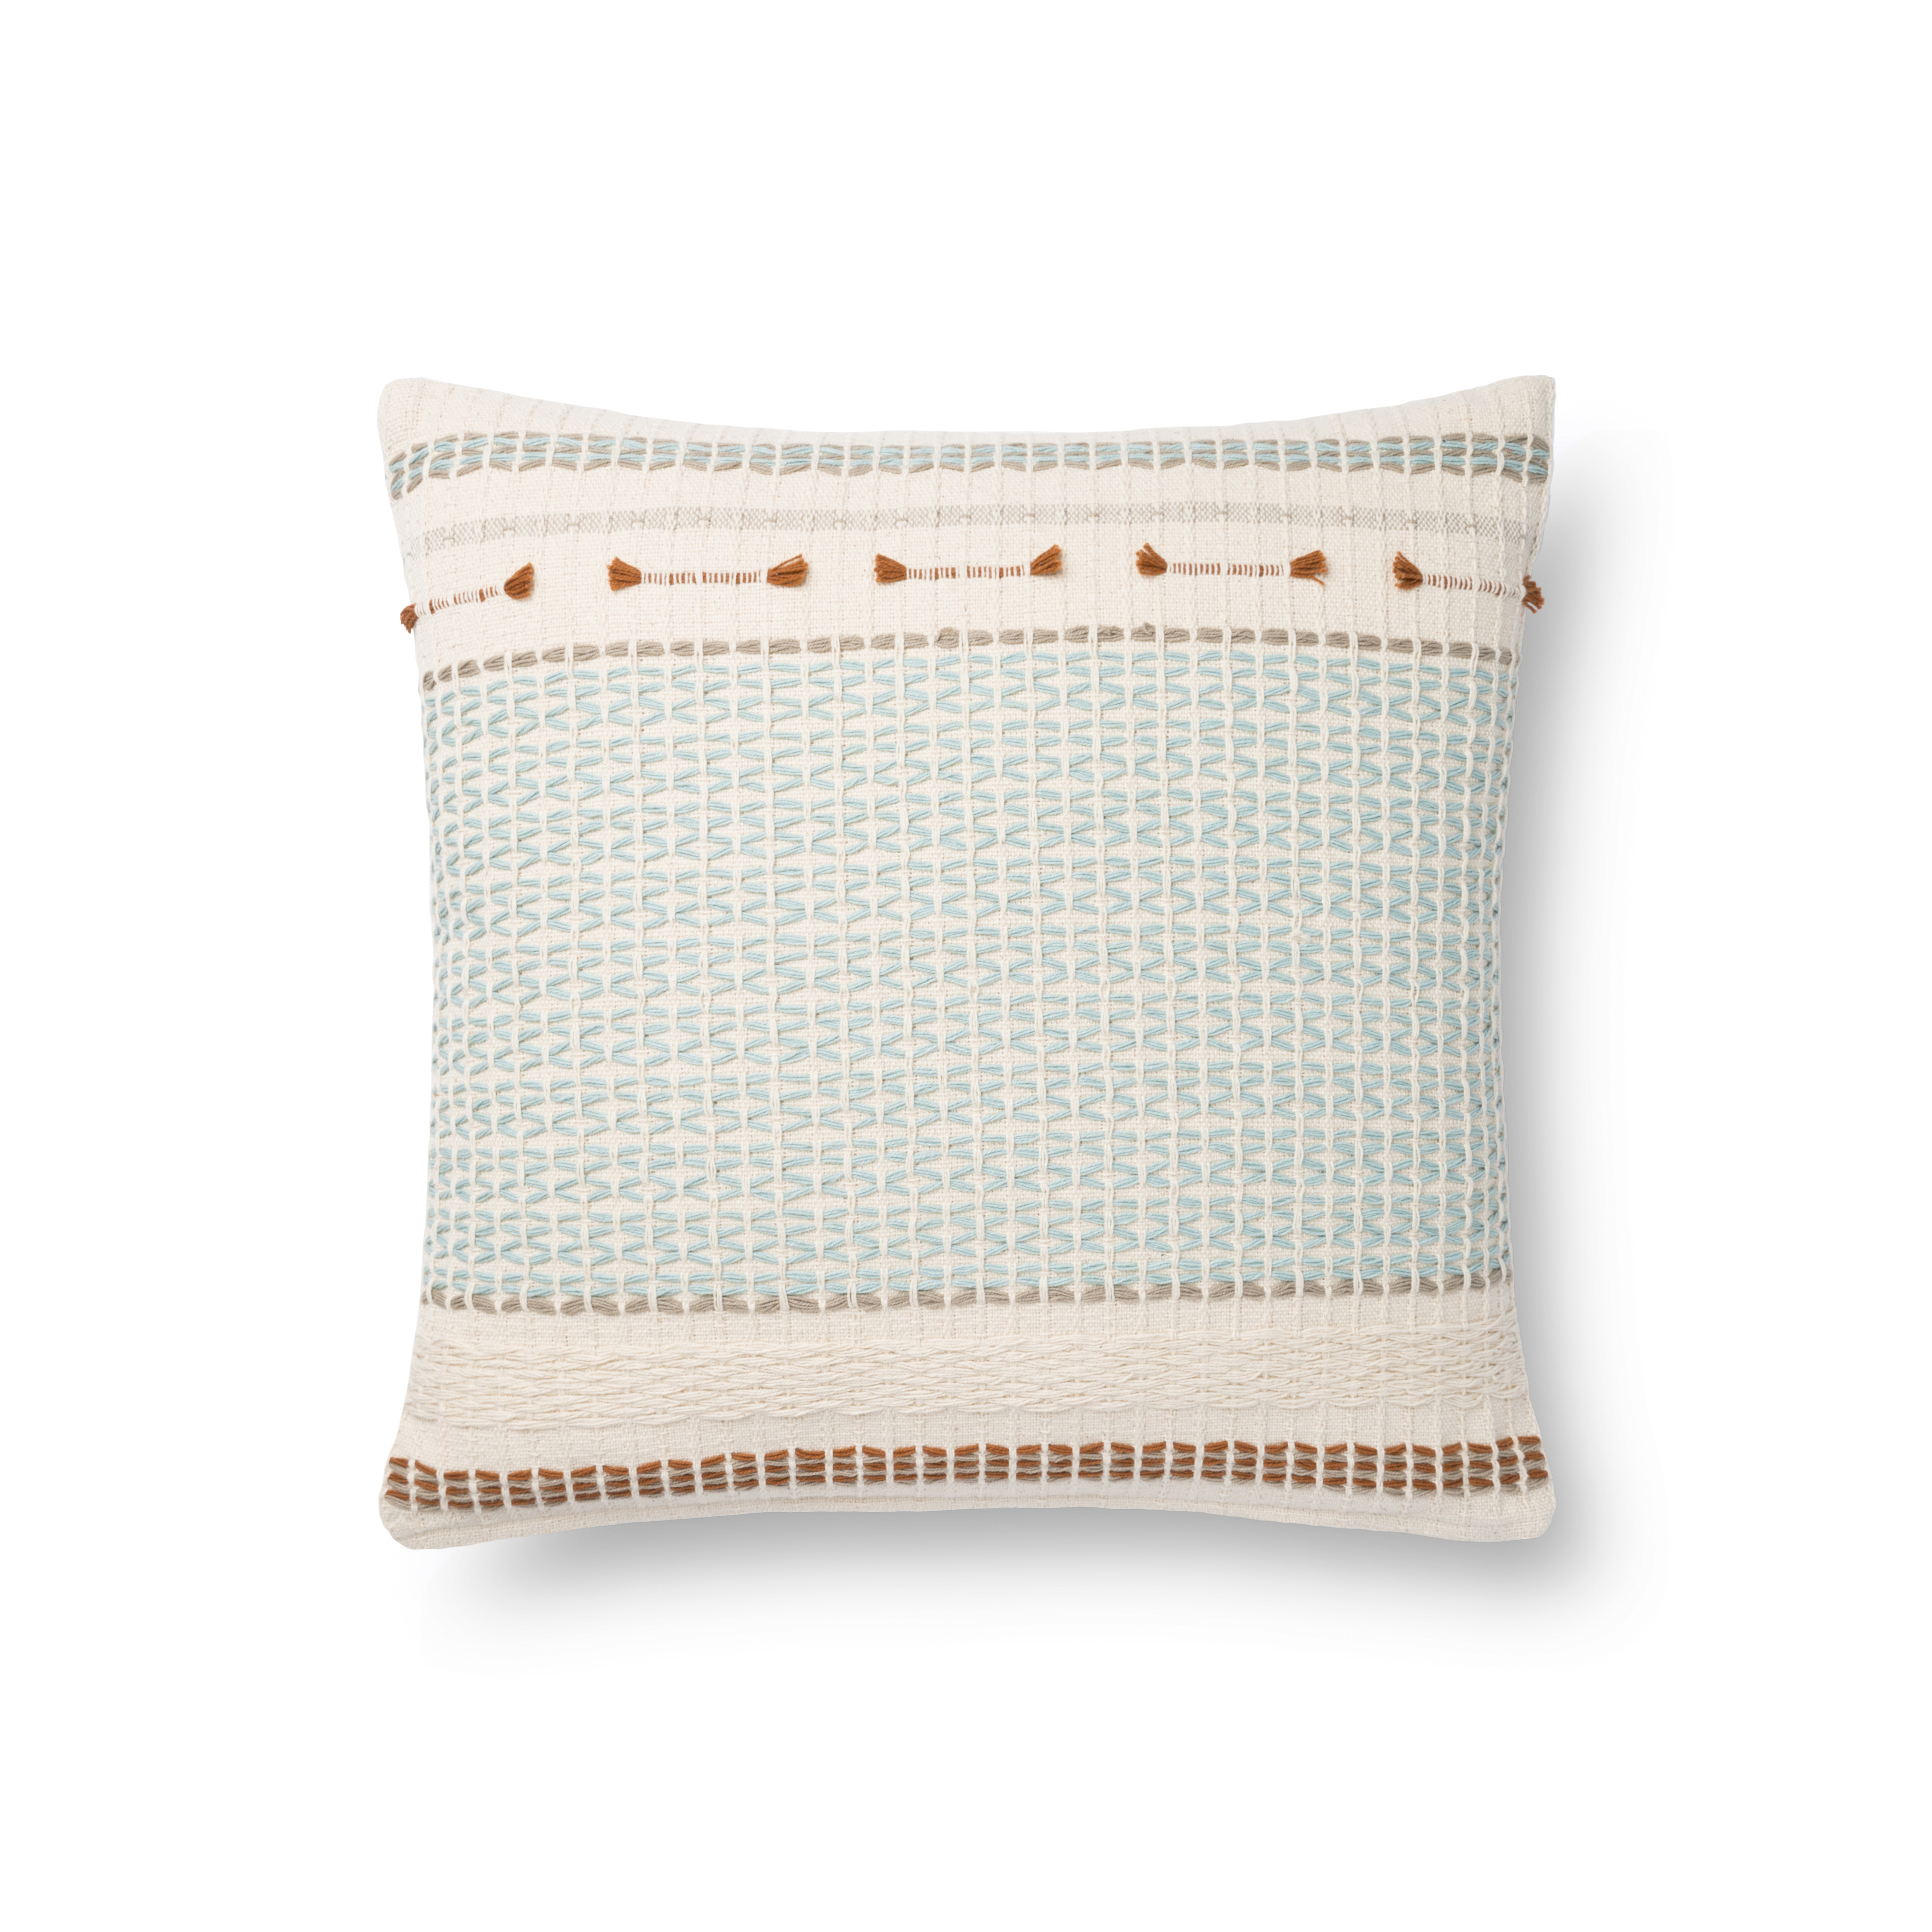 Magnolia Home by Joanna Gaines PILLOWS P1138 LIGHT BLUE / MULTI 18" x 18" Cover Only - Loloi Rugs